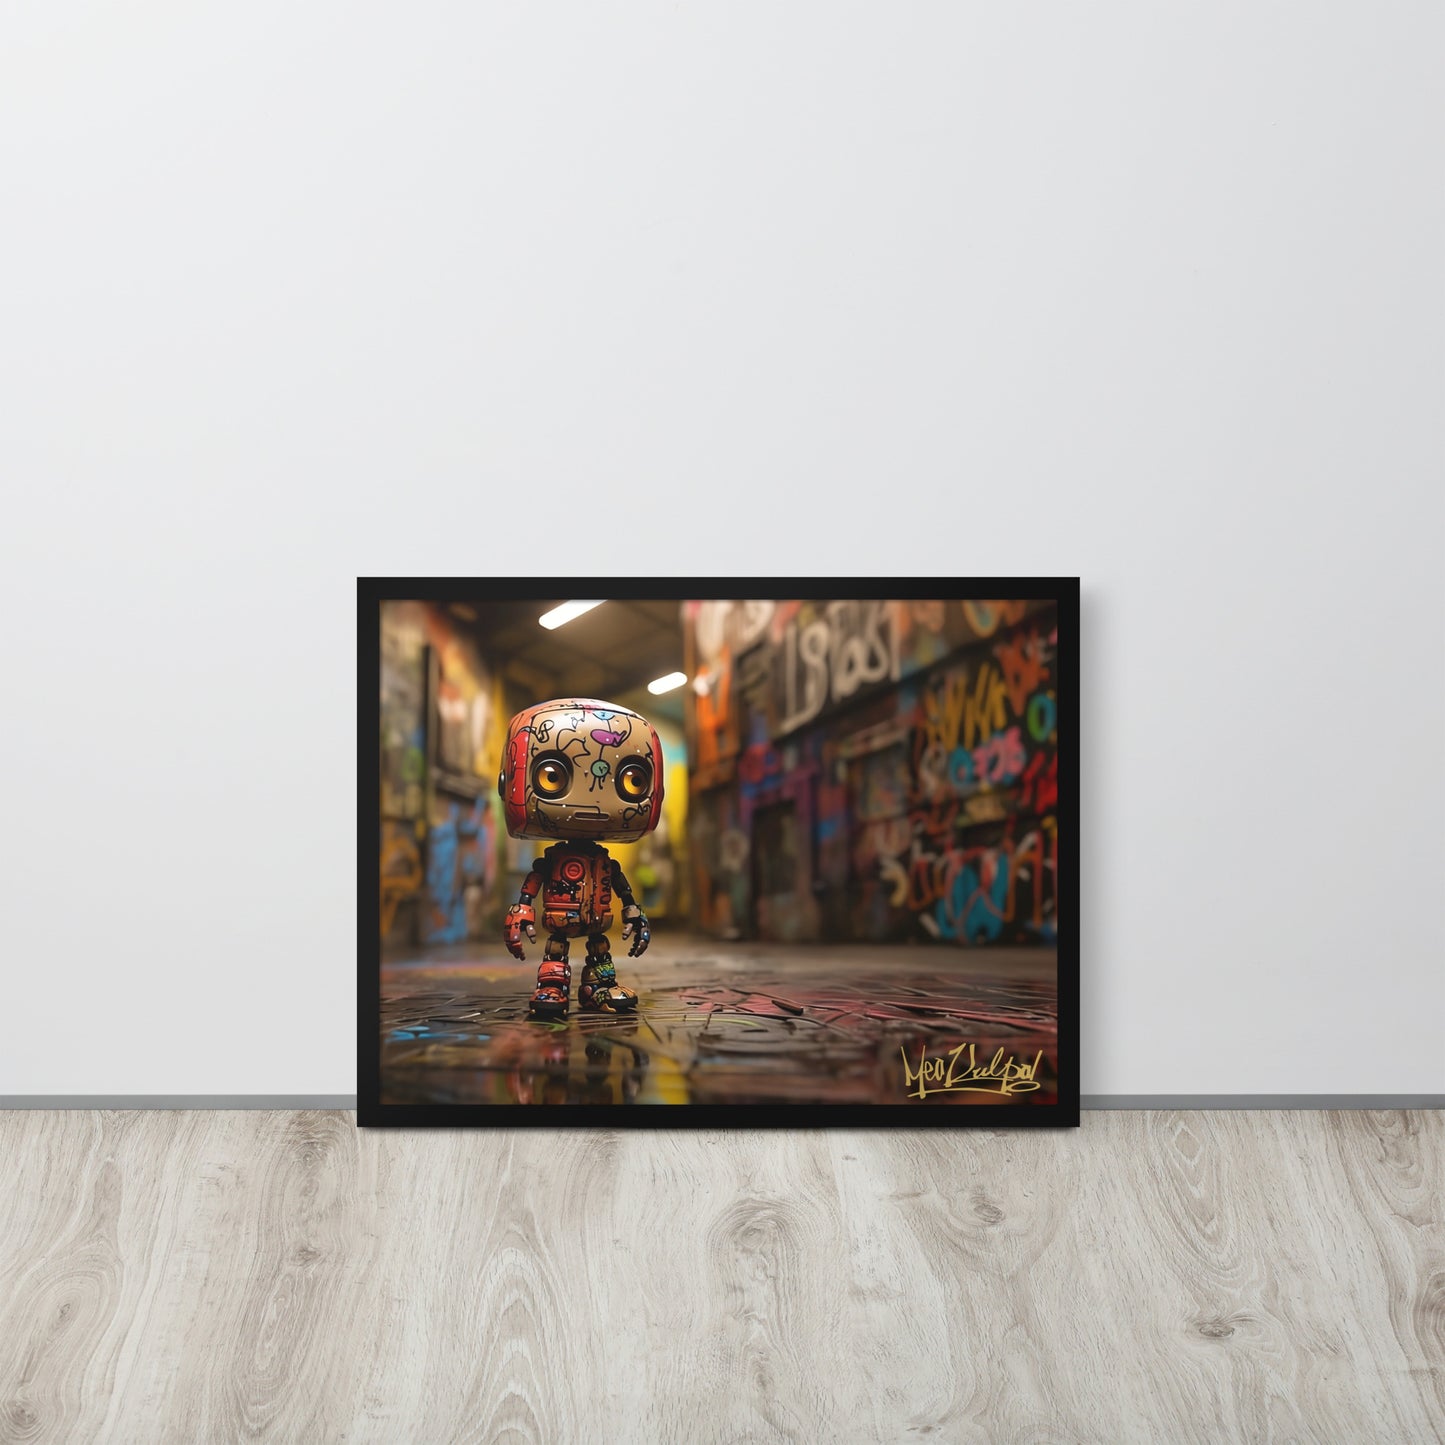 In this striking image, Bad Bot commands attention as it faces right of the camera, creating an aura of rebellious energy. The MeaKulpa logo proudly sits at the bottom right, a testament to the brand's distinct identity. Available in sizes from 8"x10" to 24"x36", this framed picture is not just art; it's a bold proclamation that adds a touch of avant-garde flair to your space.